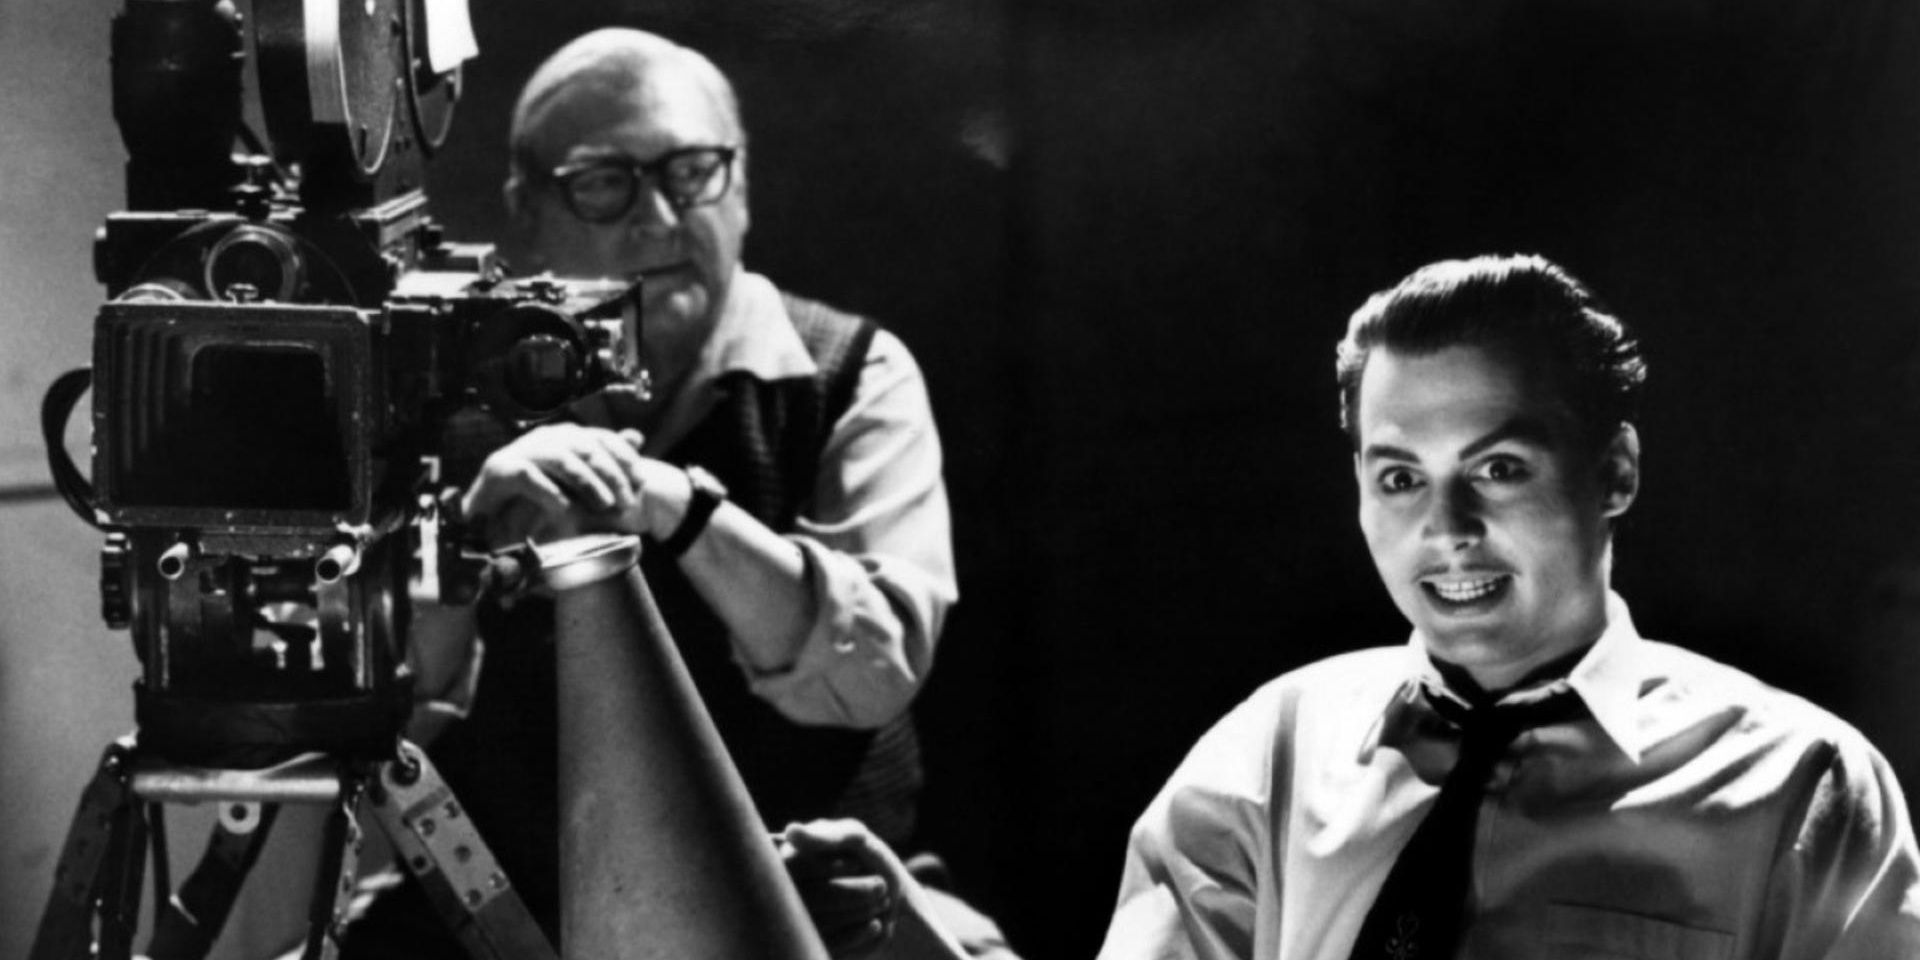 Ed Wood sits next to a camera as he directs a movie.